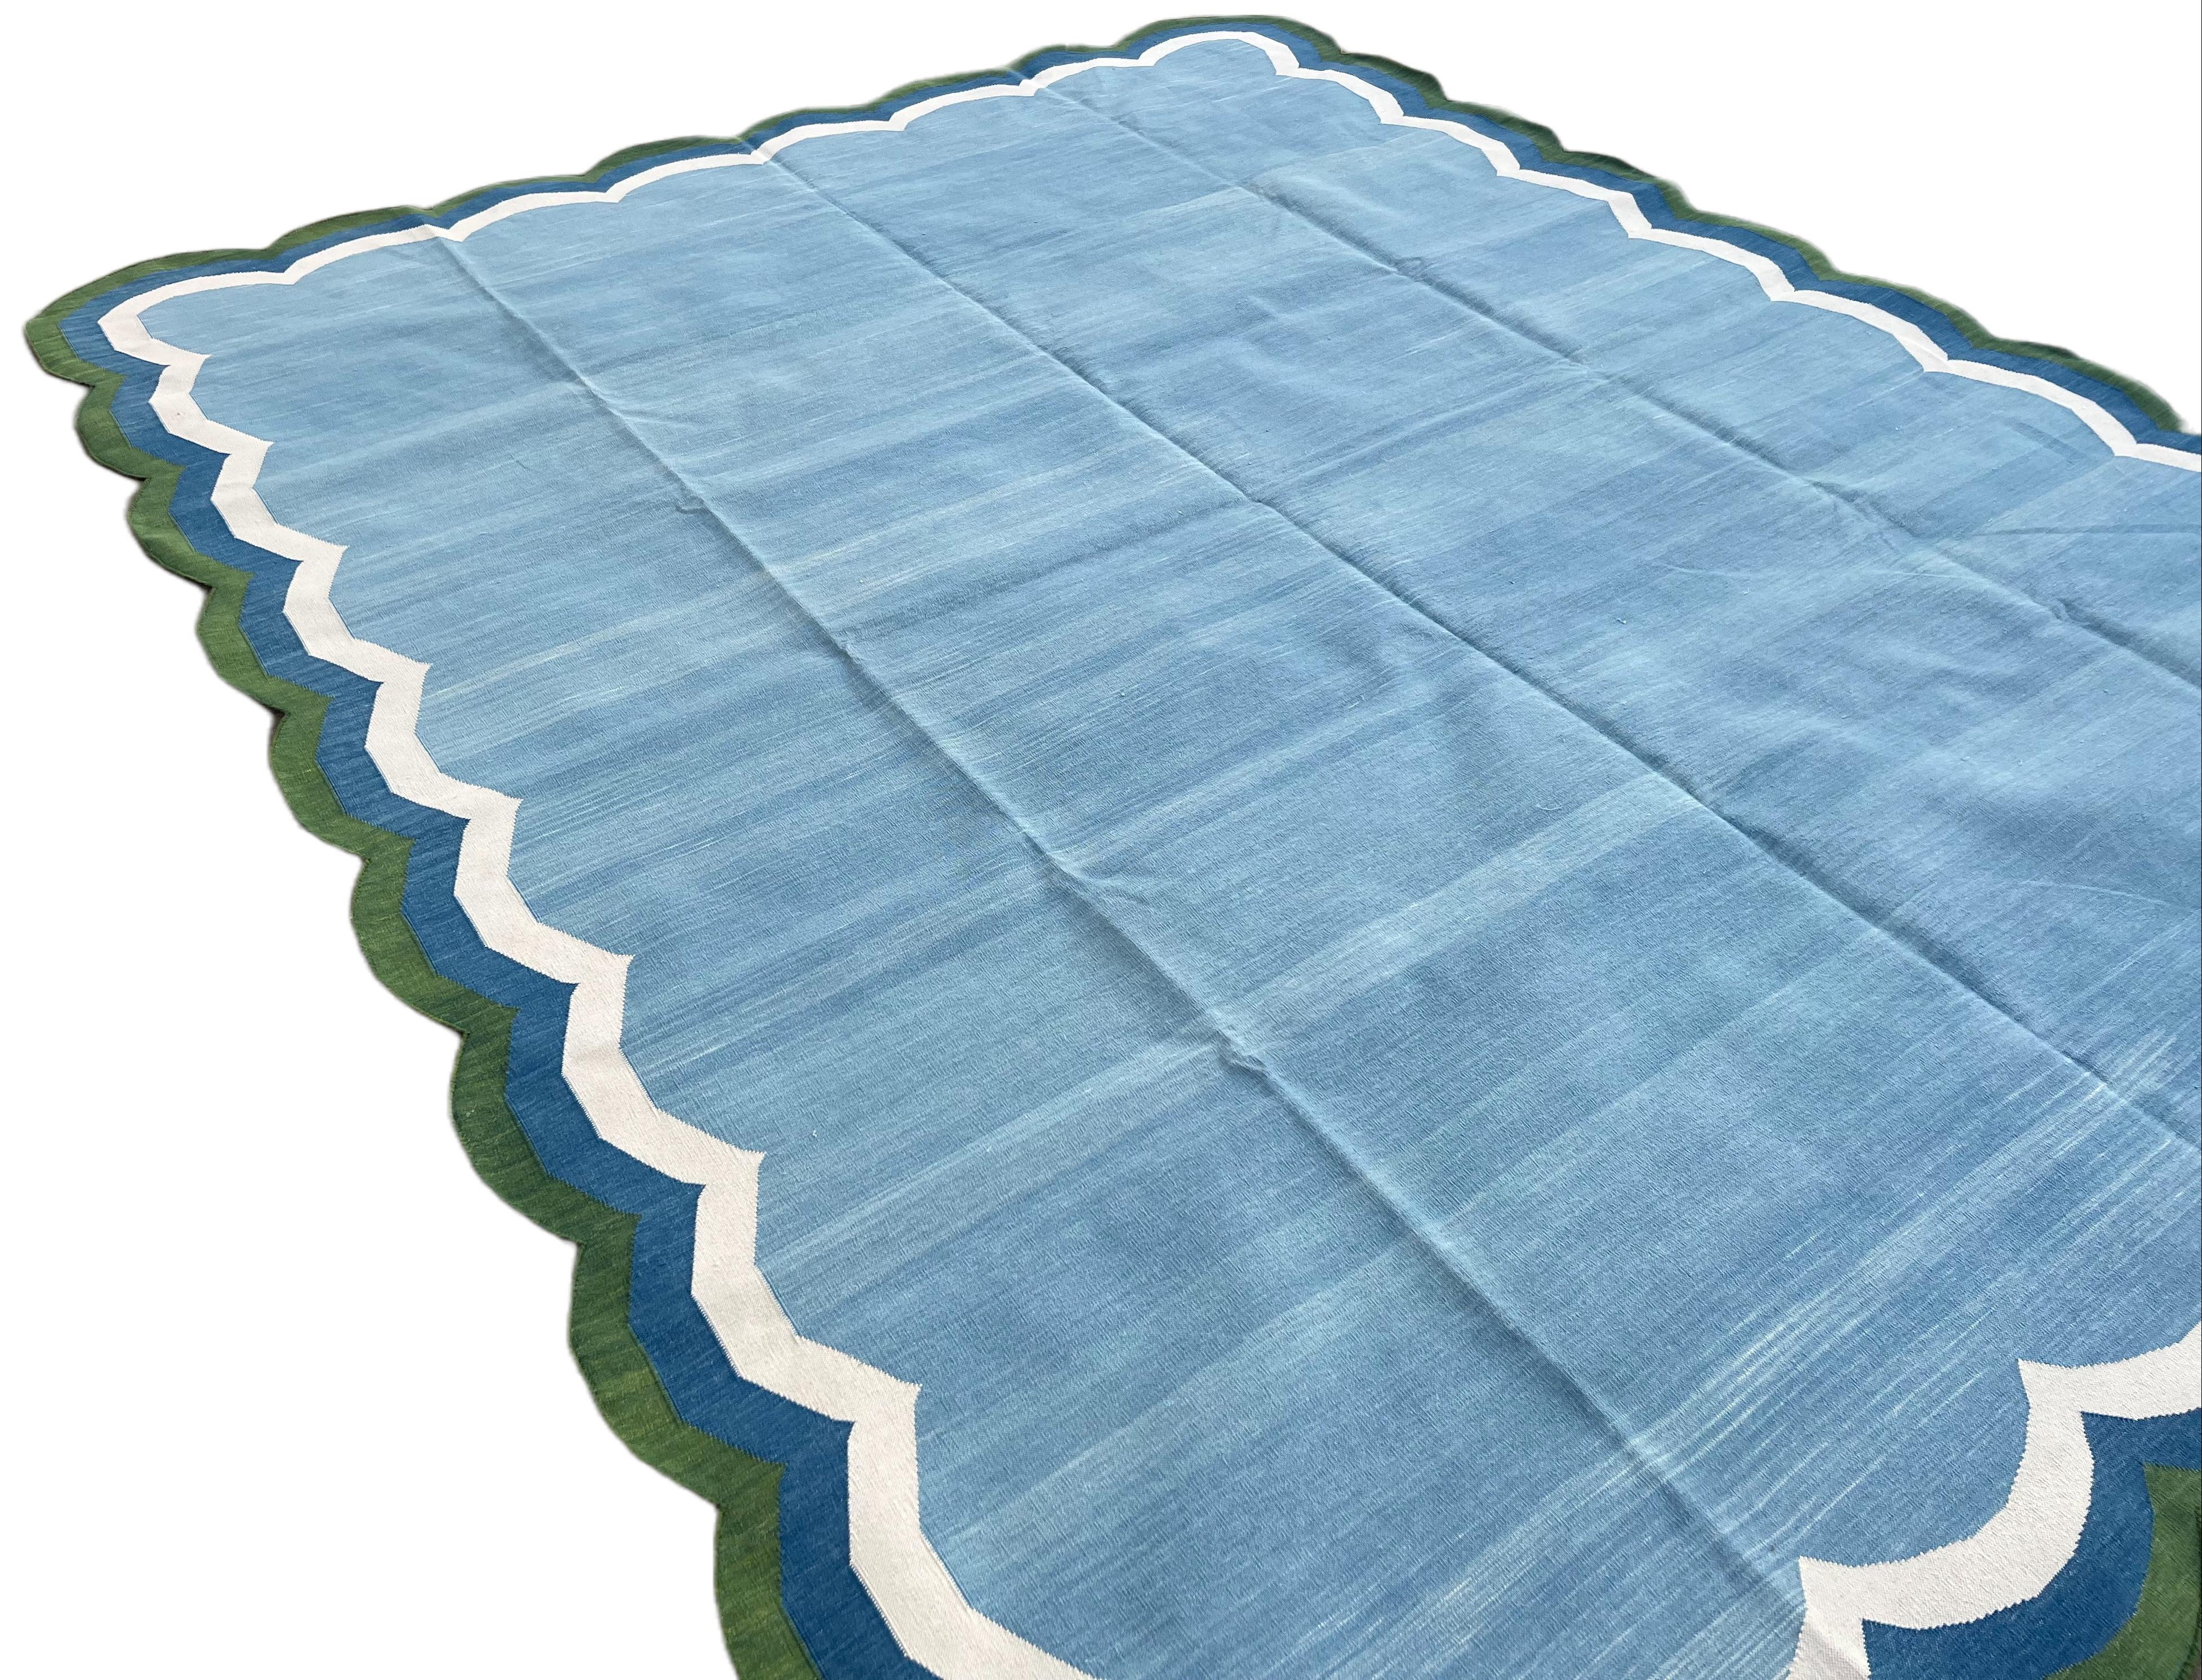 Hand-Woven Handmade Cotton Area Flat Weave Rug, 8x10 Blue And Green Scallop Striped Dhurrie For Sale